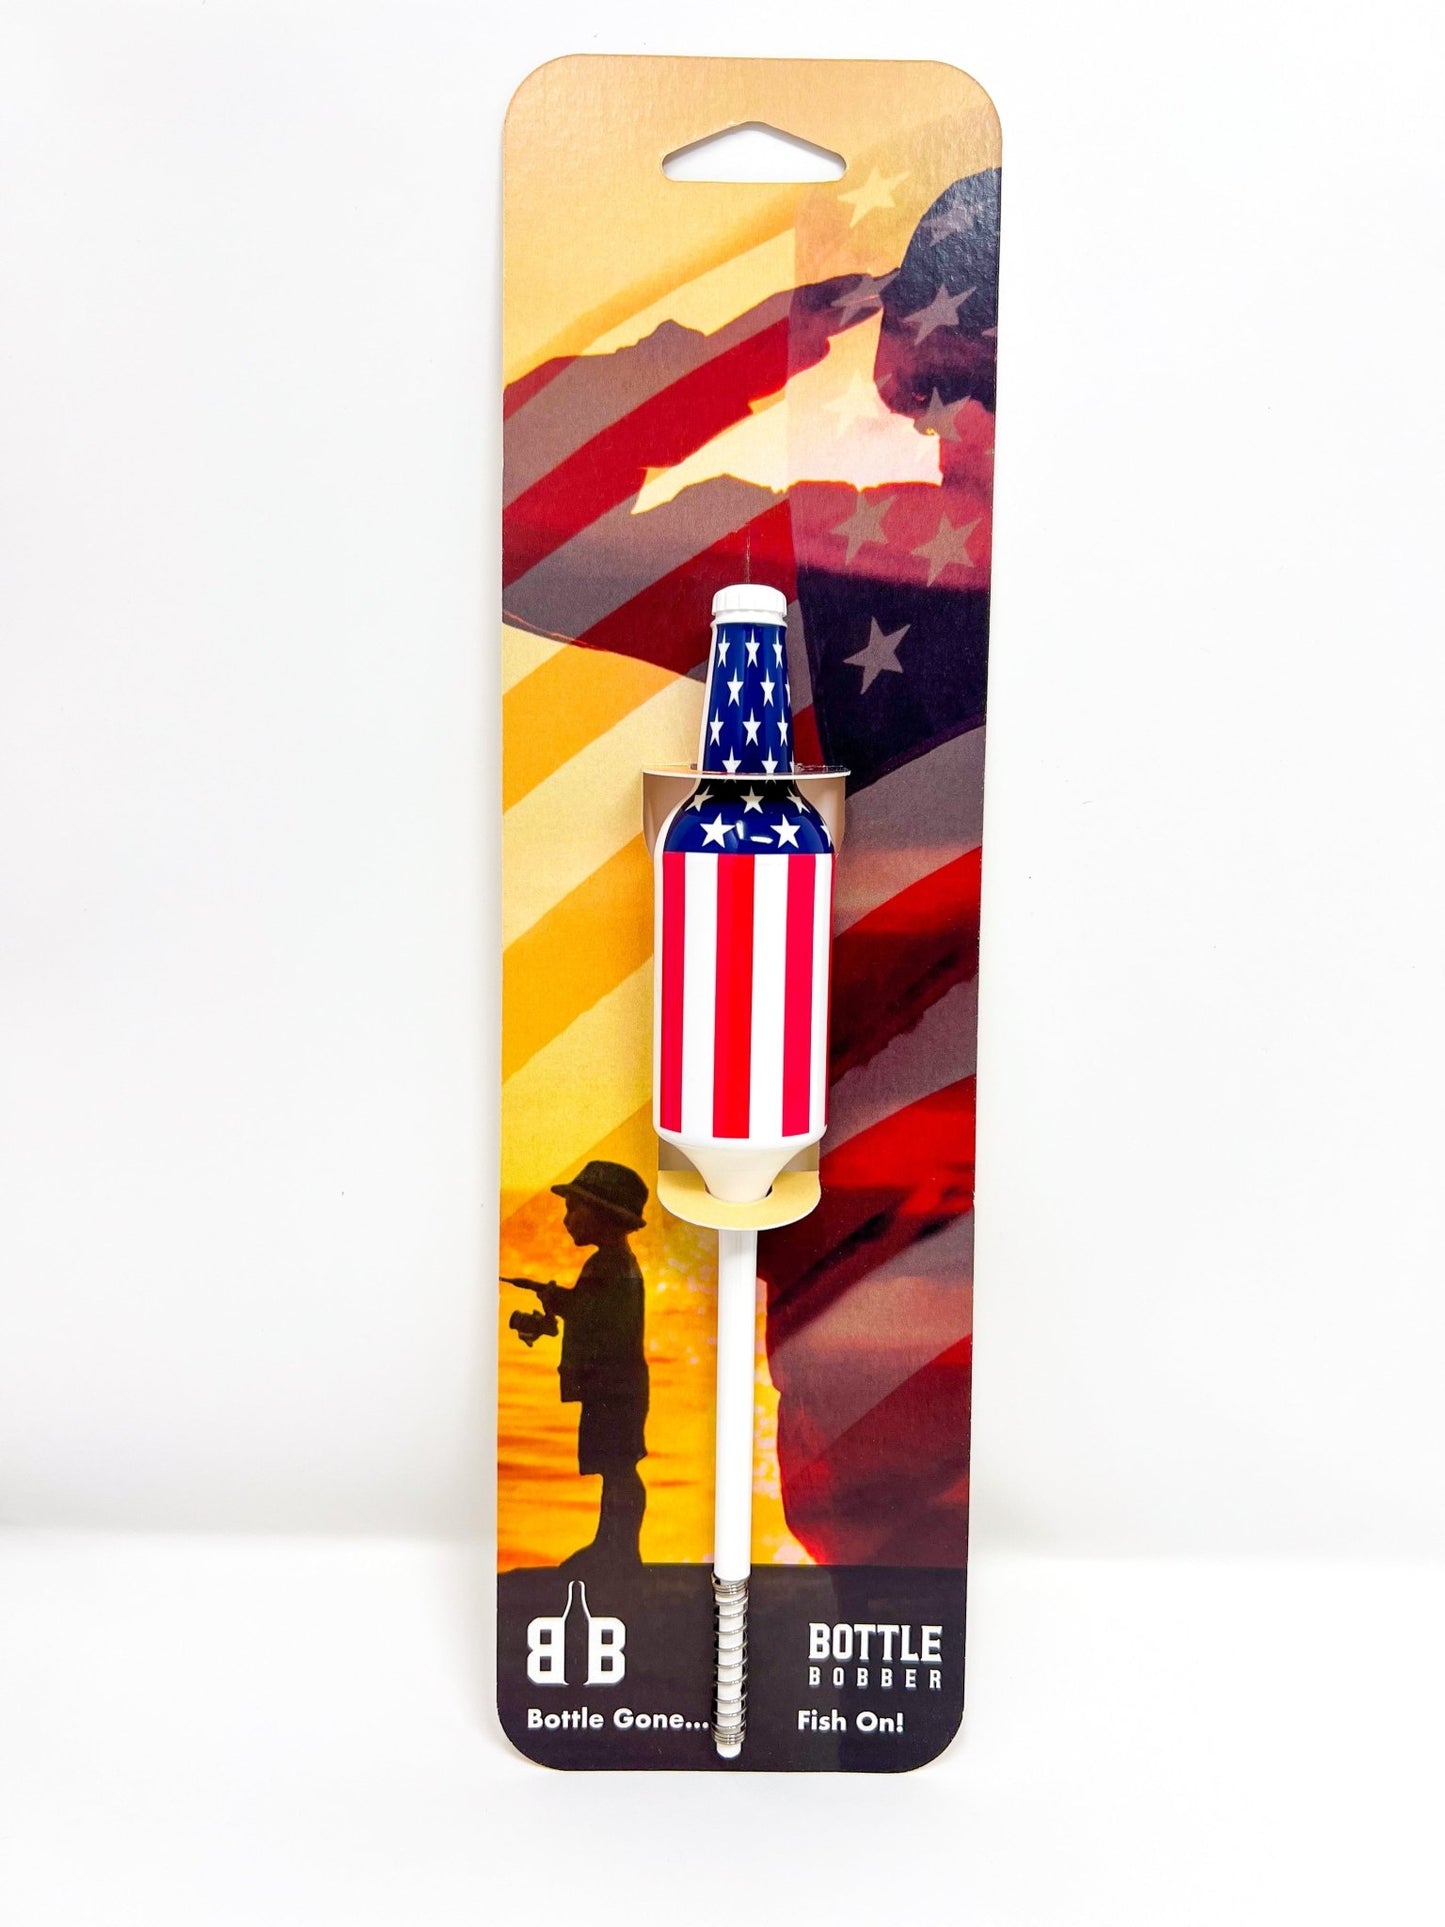 Red and white fishing bobber with a patriotic theme from the Veterans gift pack